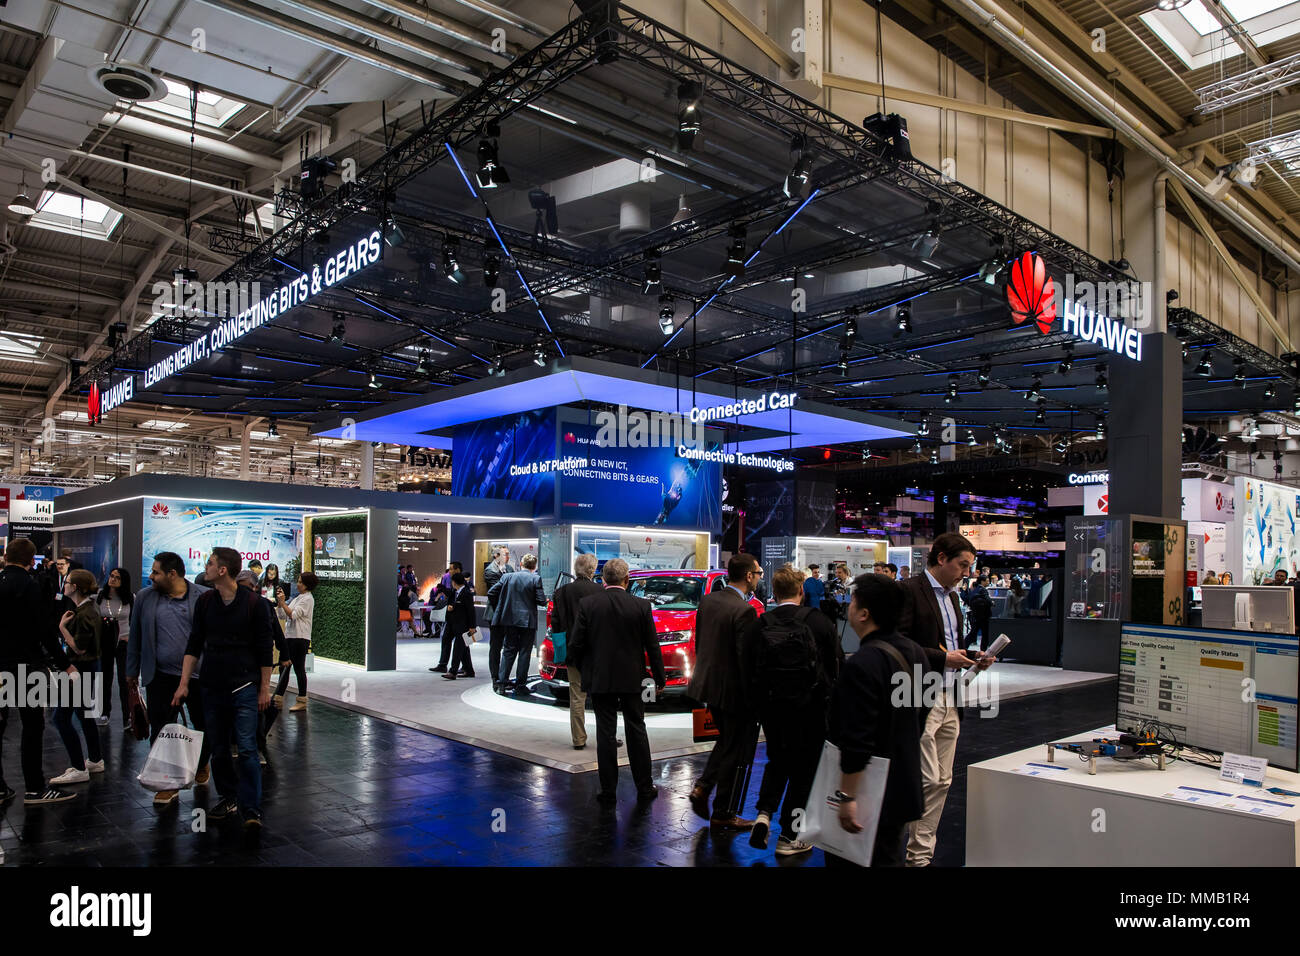 Hannover, Germany - April, 2018: Huawei booth stand on Messe fair in Hannover, Germany Stock Photo